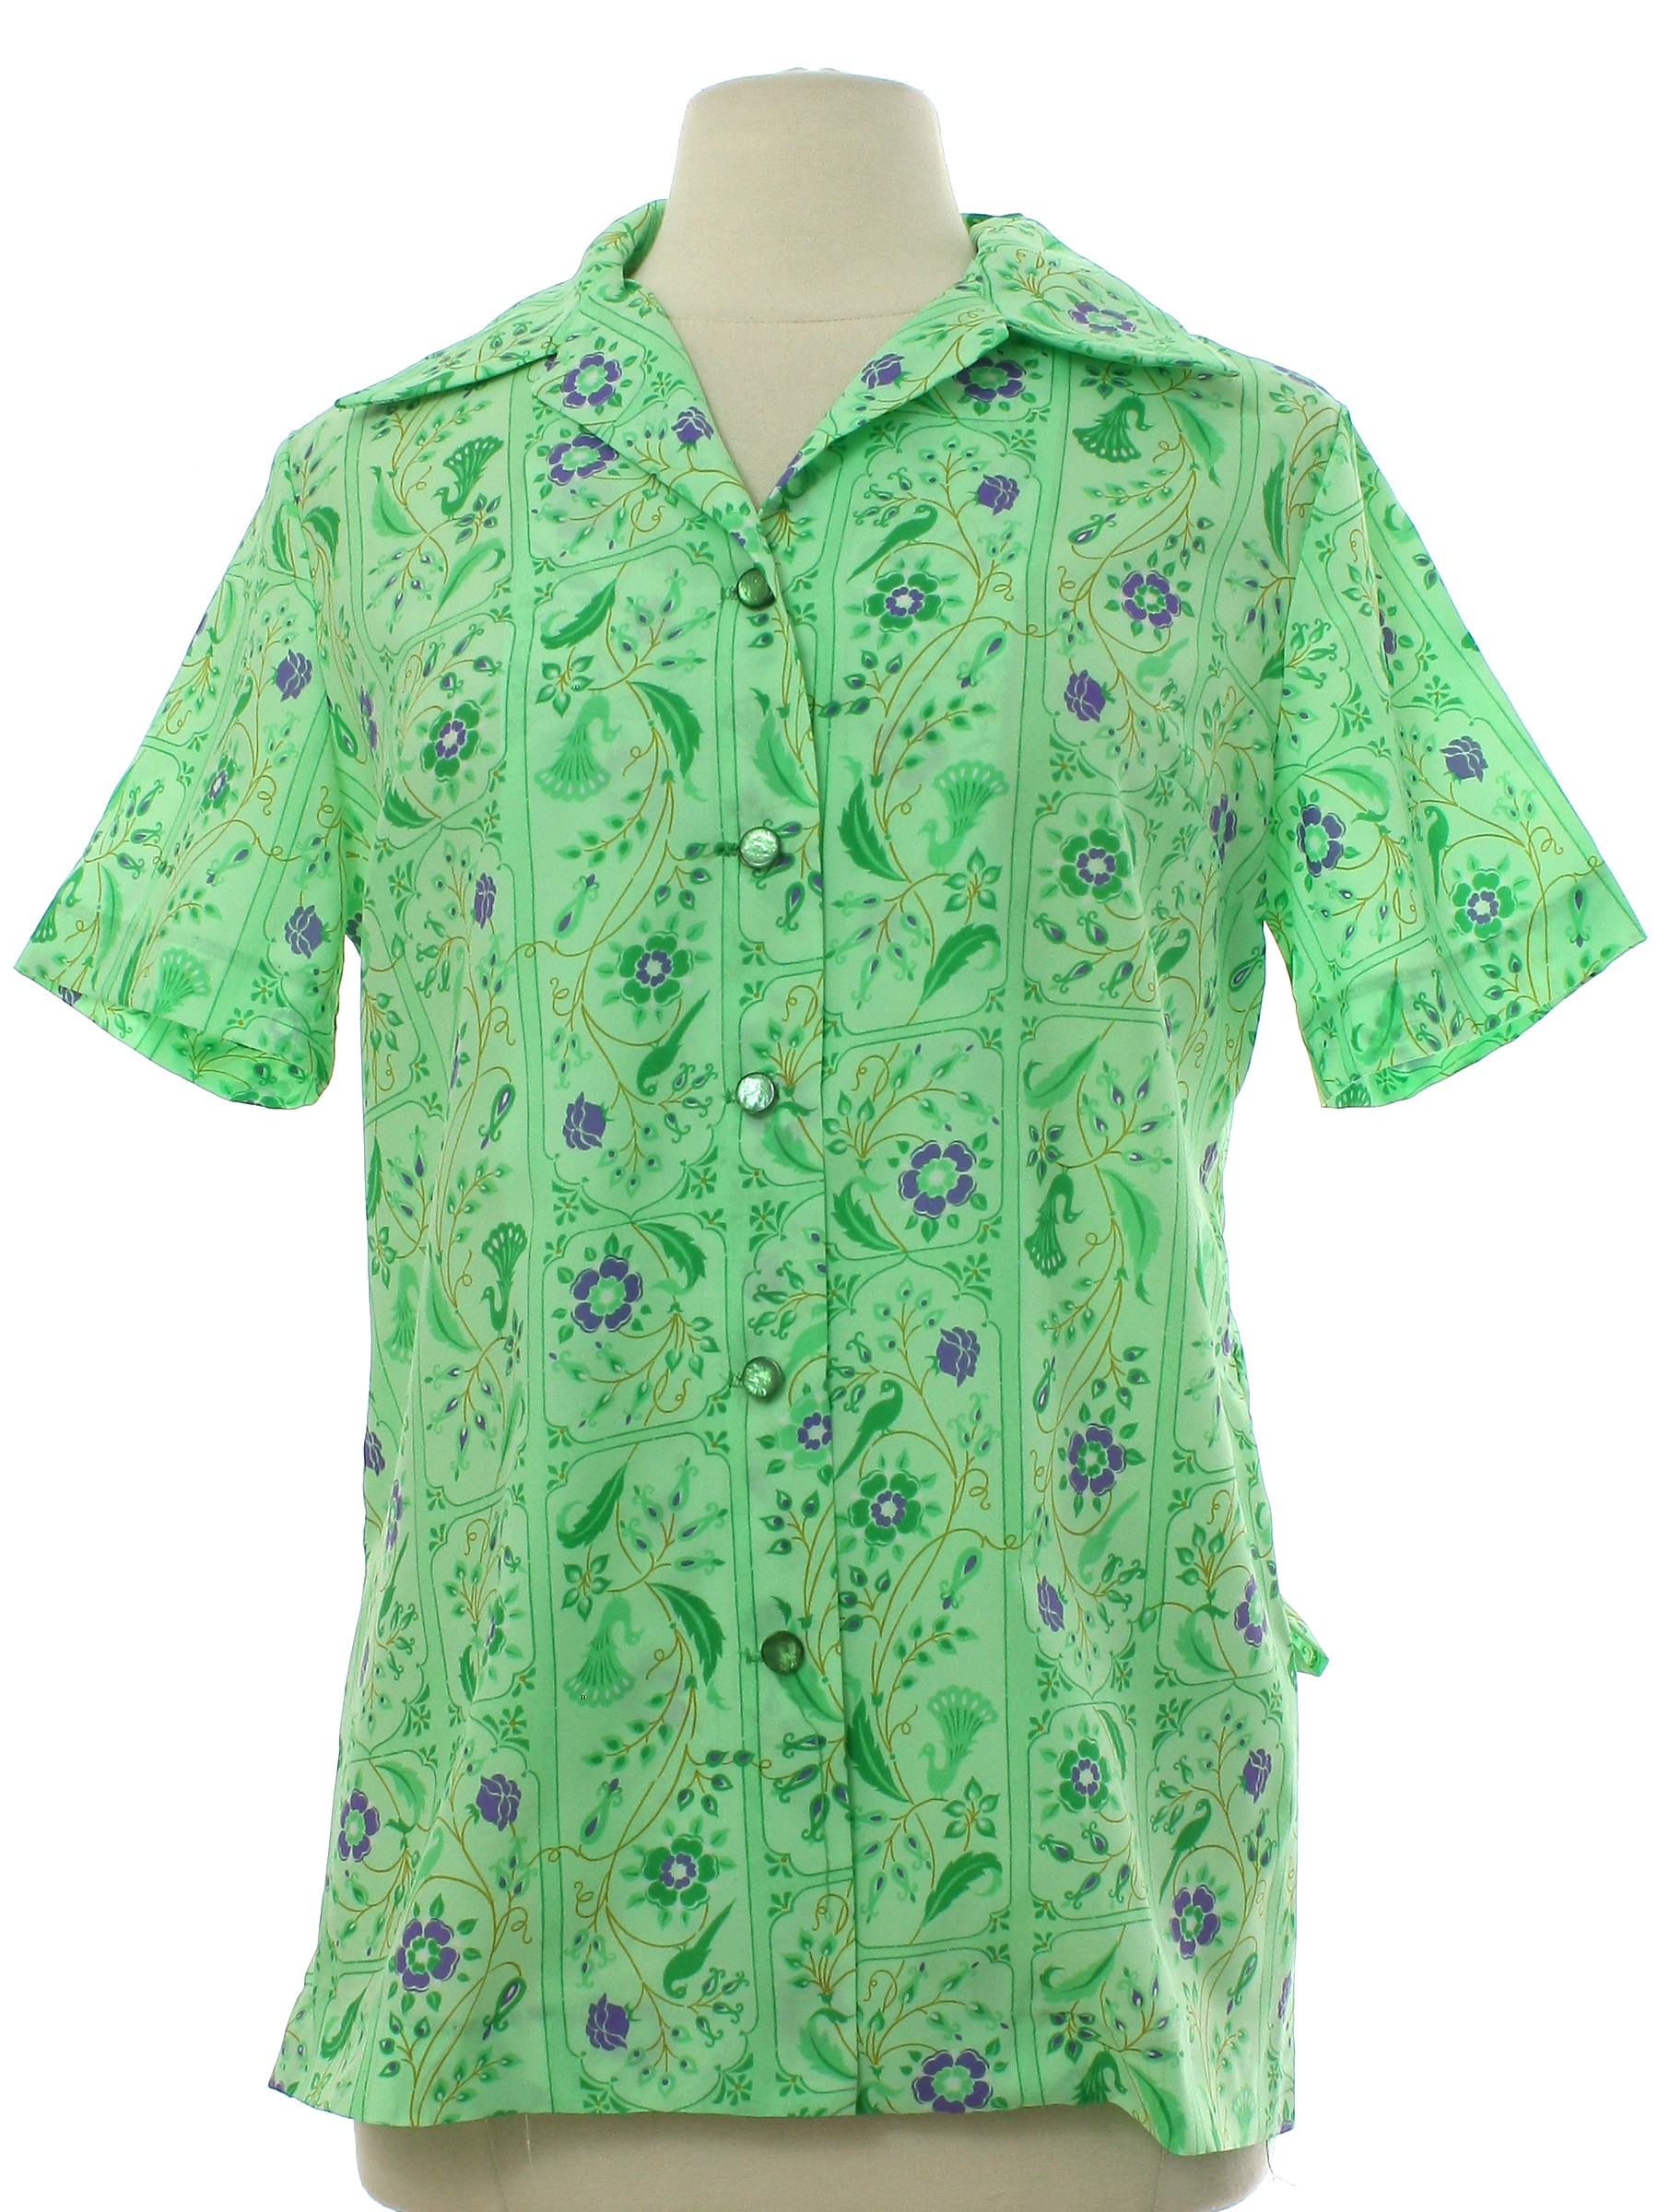 70s Retro Shirt: 70s -Pykettes- Womens mint green background silky ...